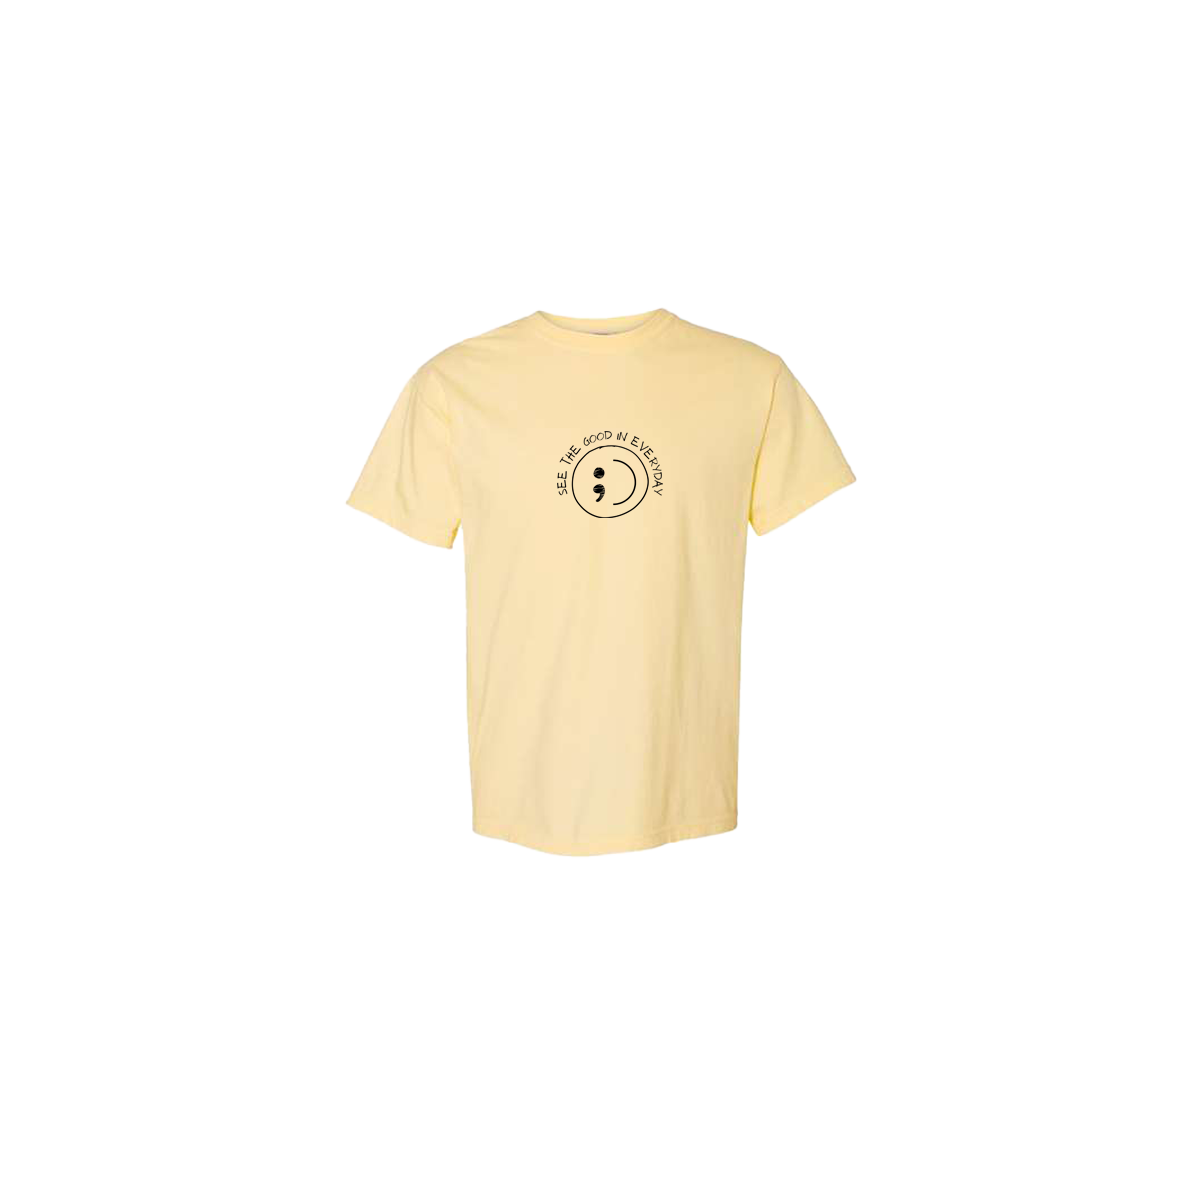 See the Good in Everyday Smiley Embroidered Yellow Tshirt - Mental Health Awareness Clothing